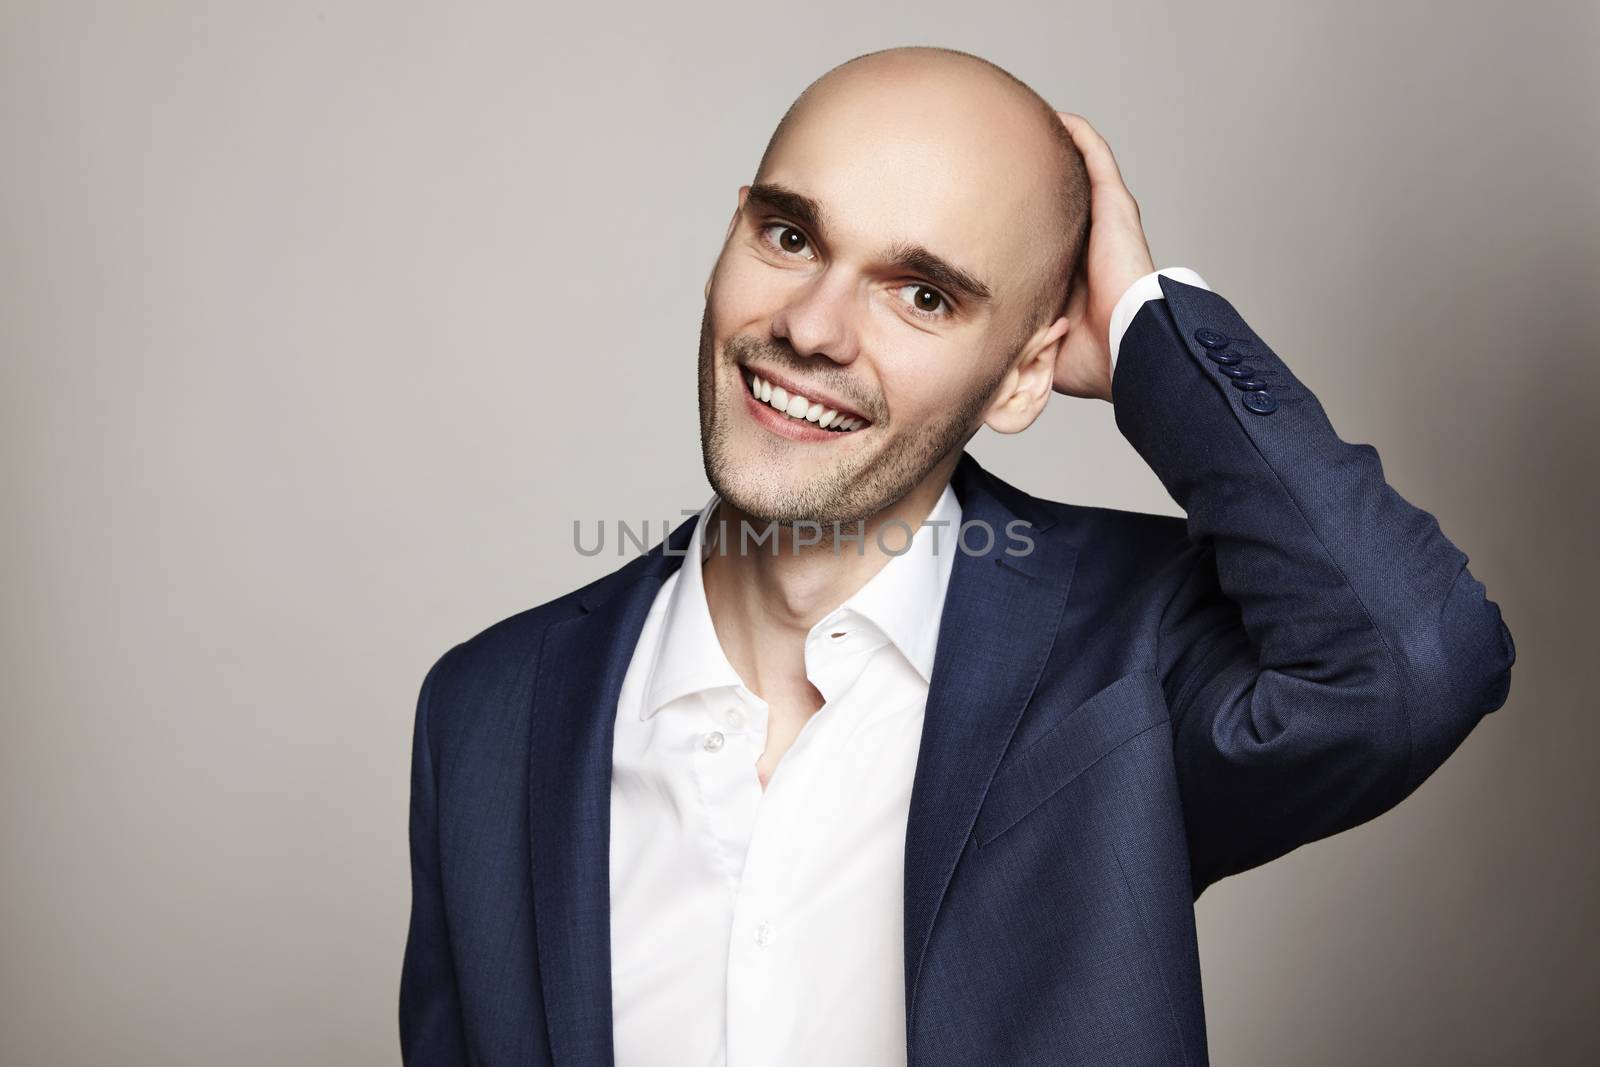 Close-up portrait of a young bald man stroking his head. He is smiling. Gray background. Horizontal.